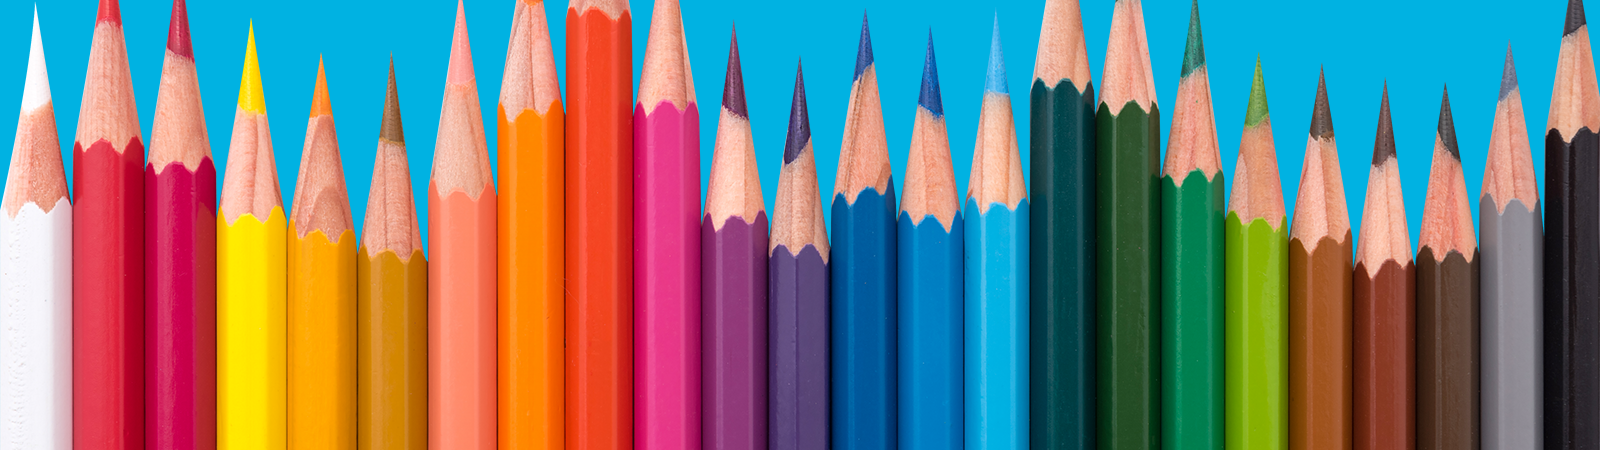 order forms with colored pencils